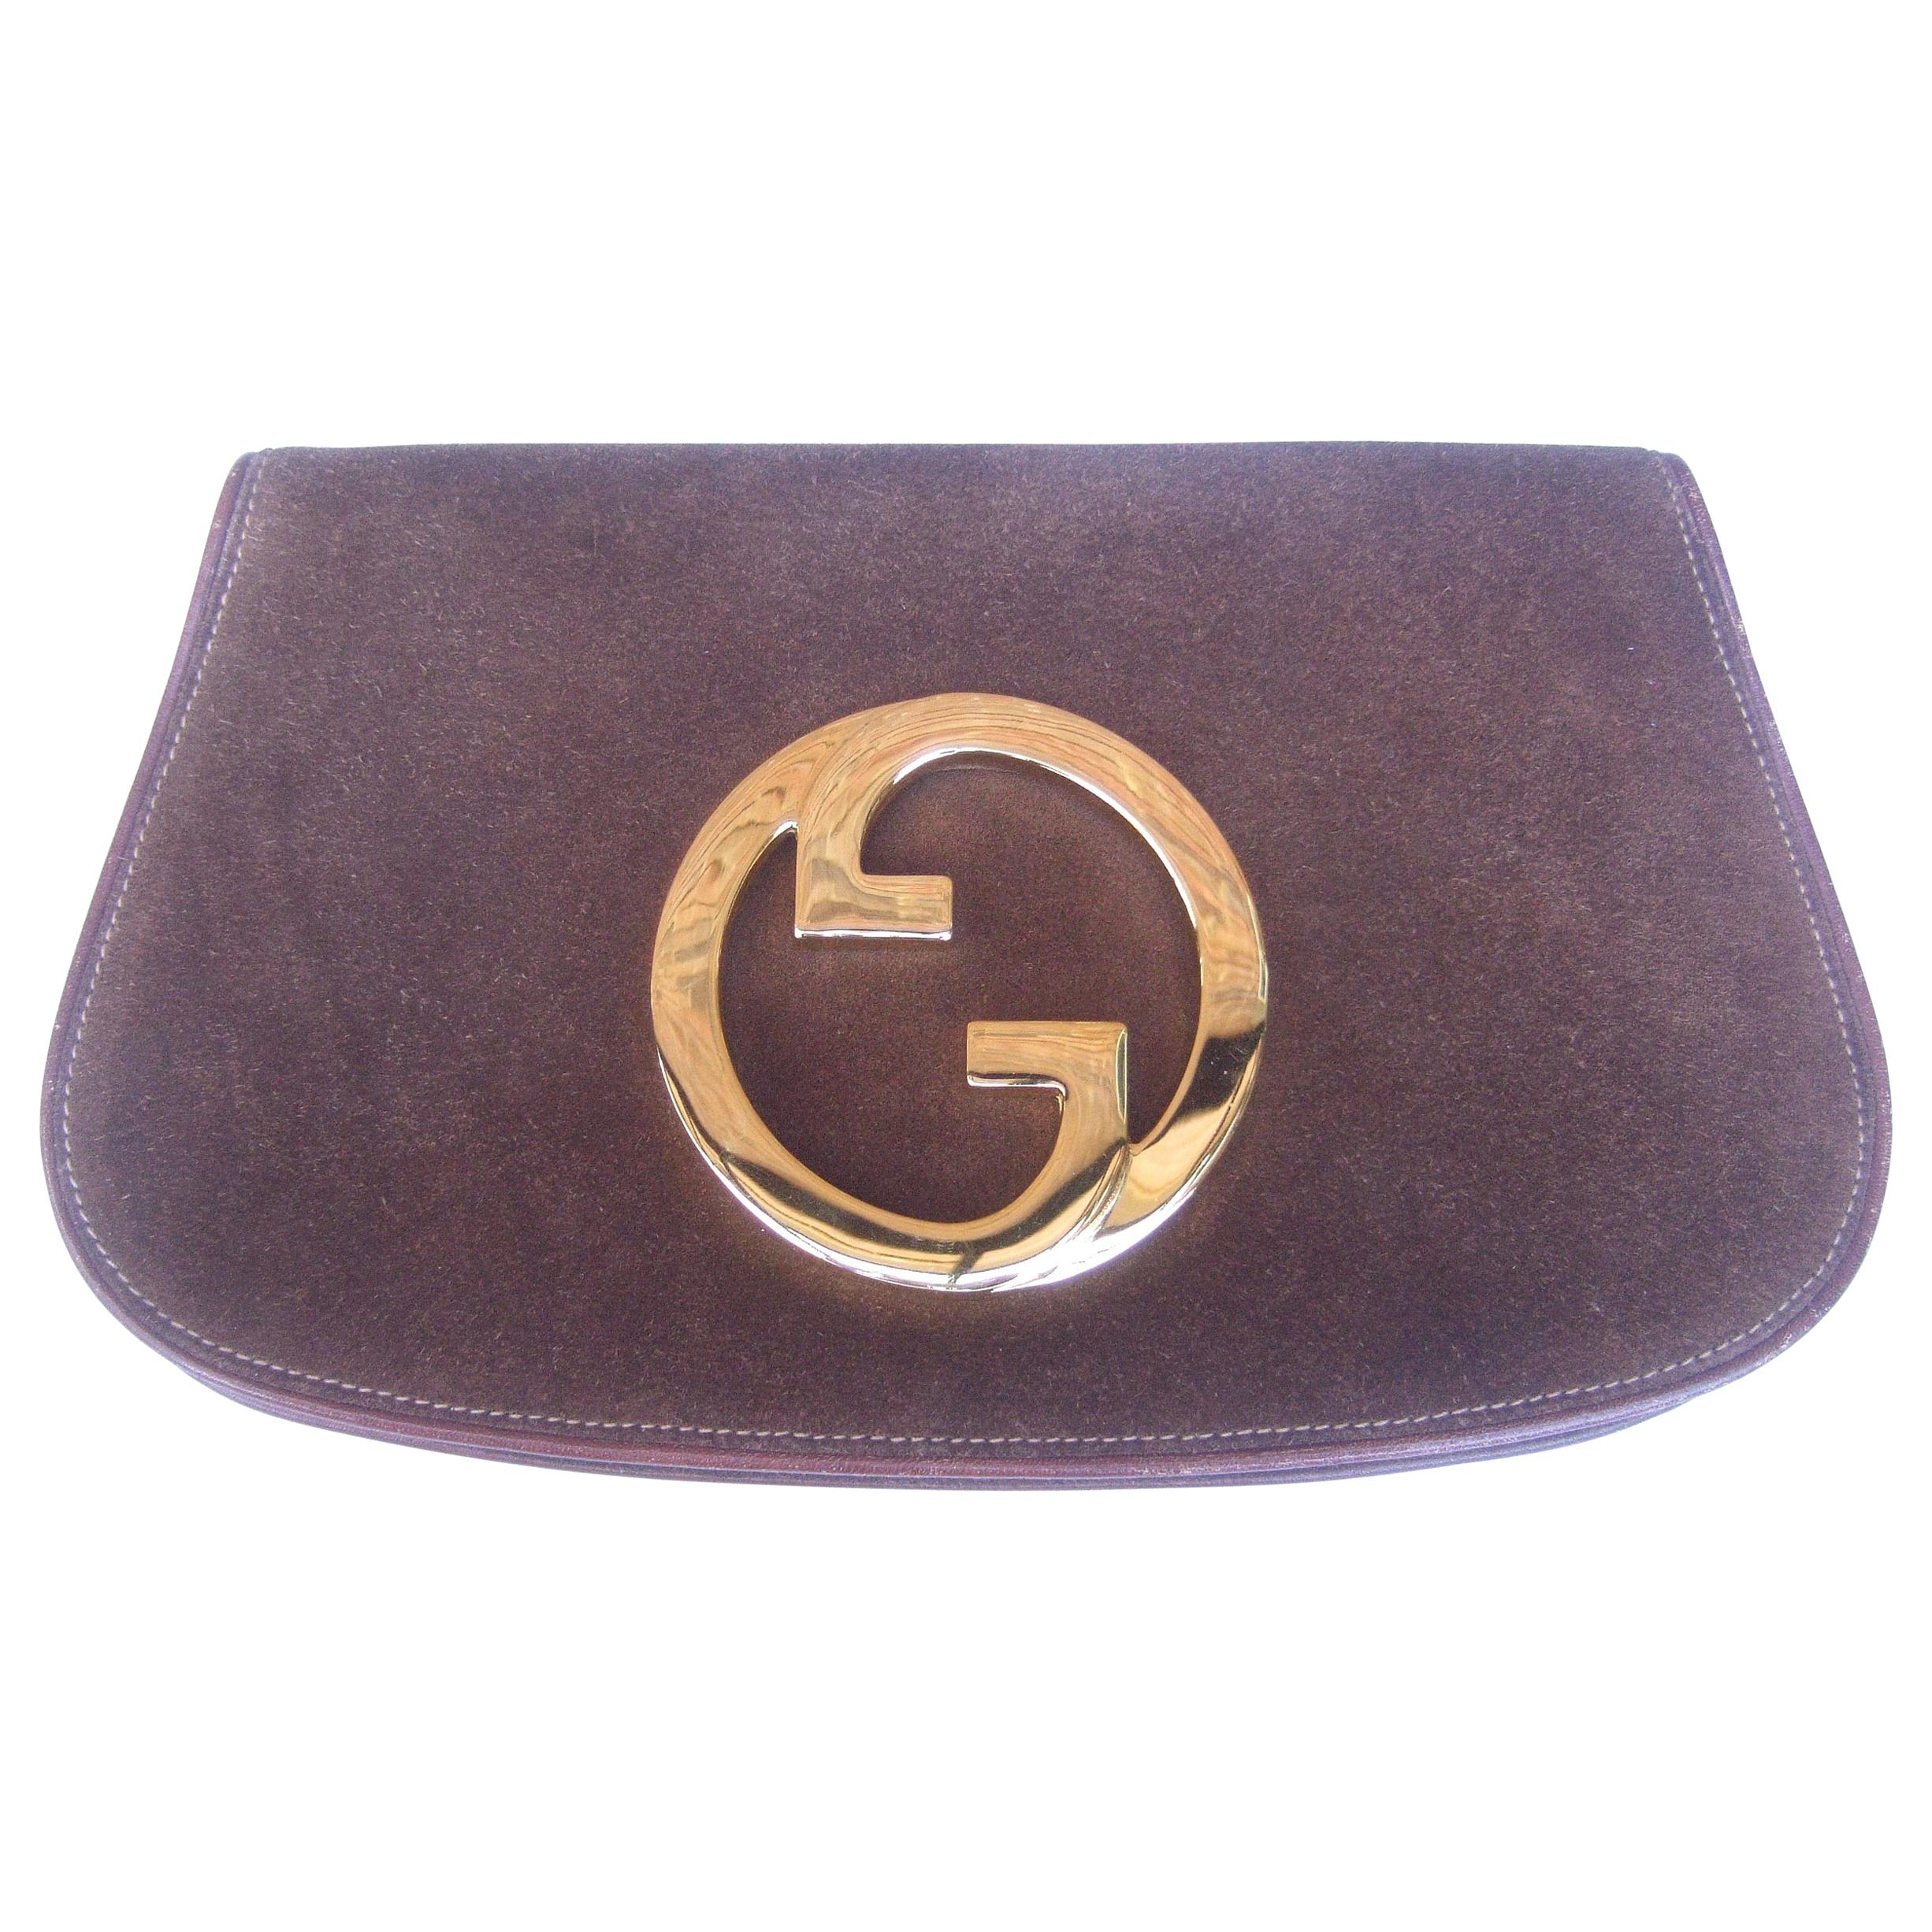 Gucci Italy Rare Brown Suede Blondie Clutch c 1970s 